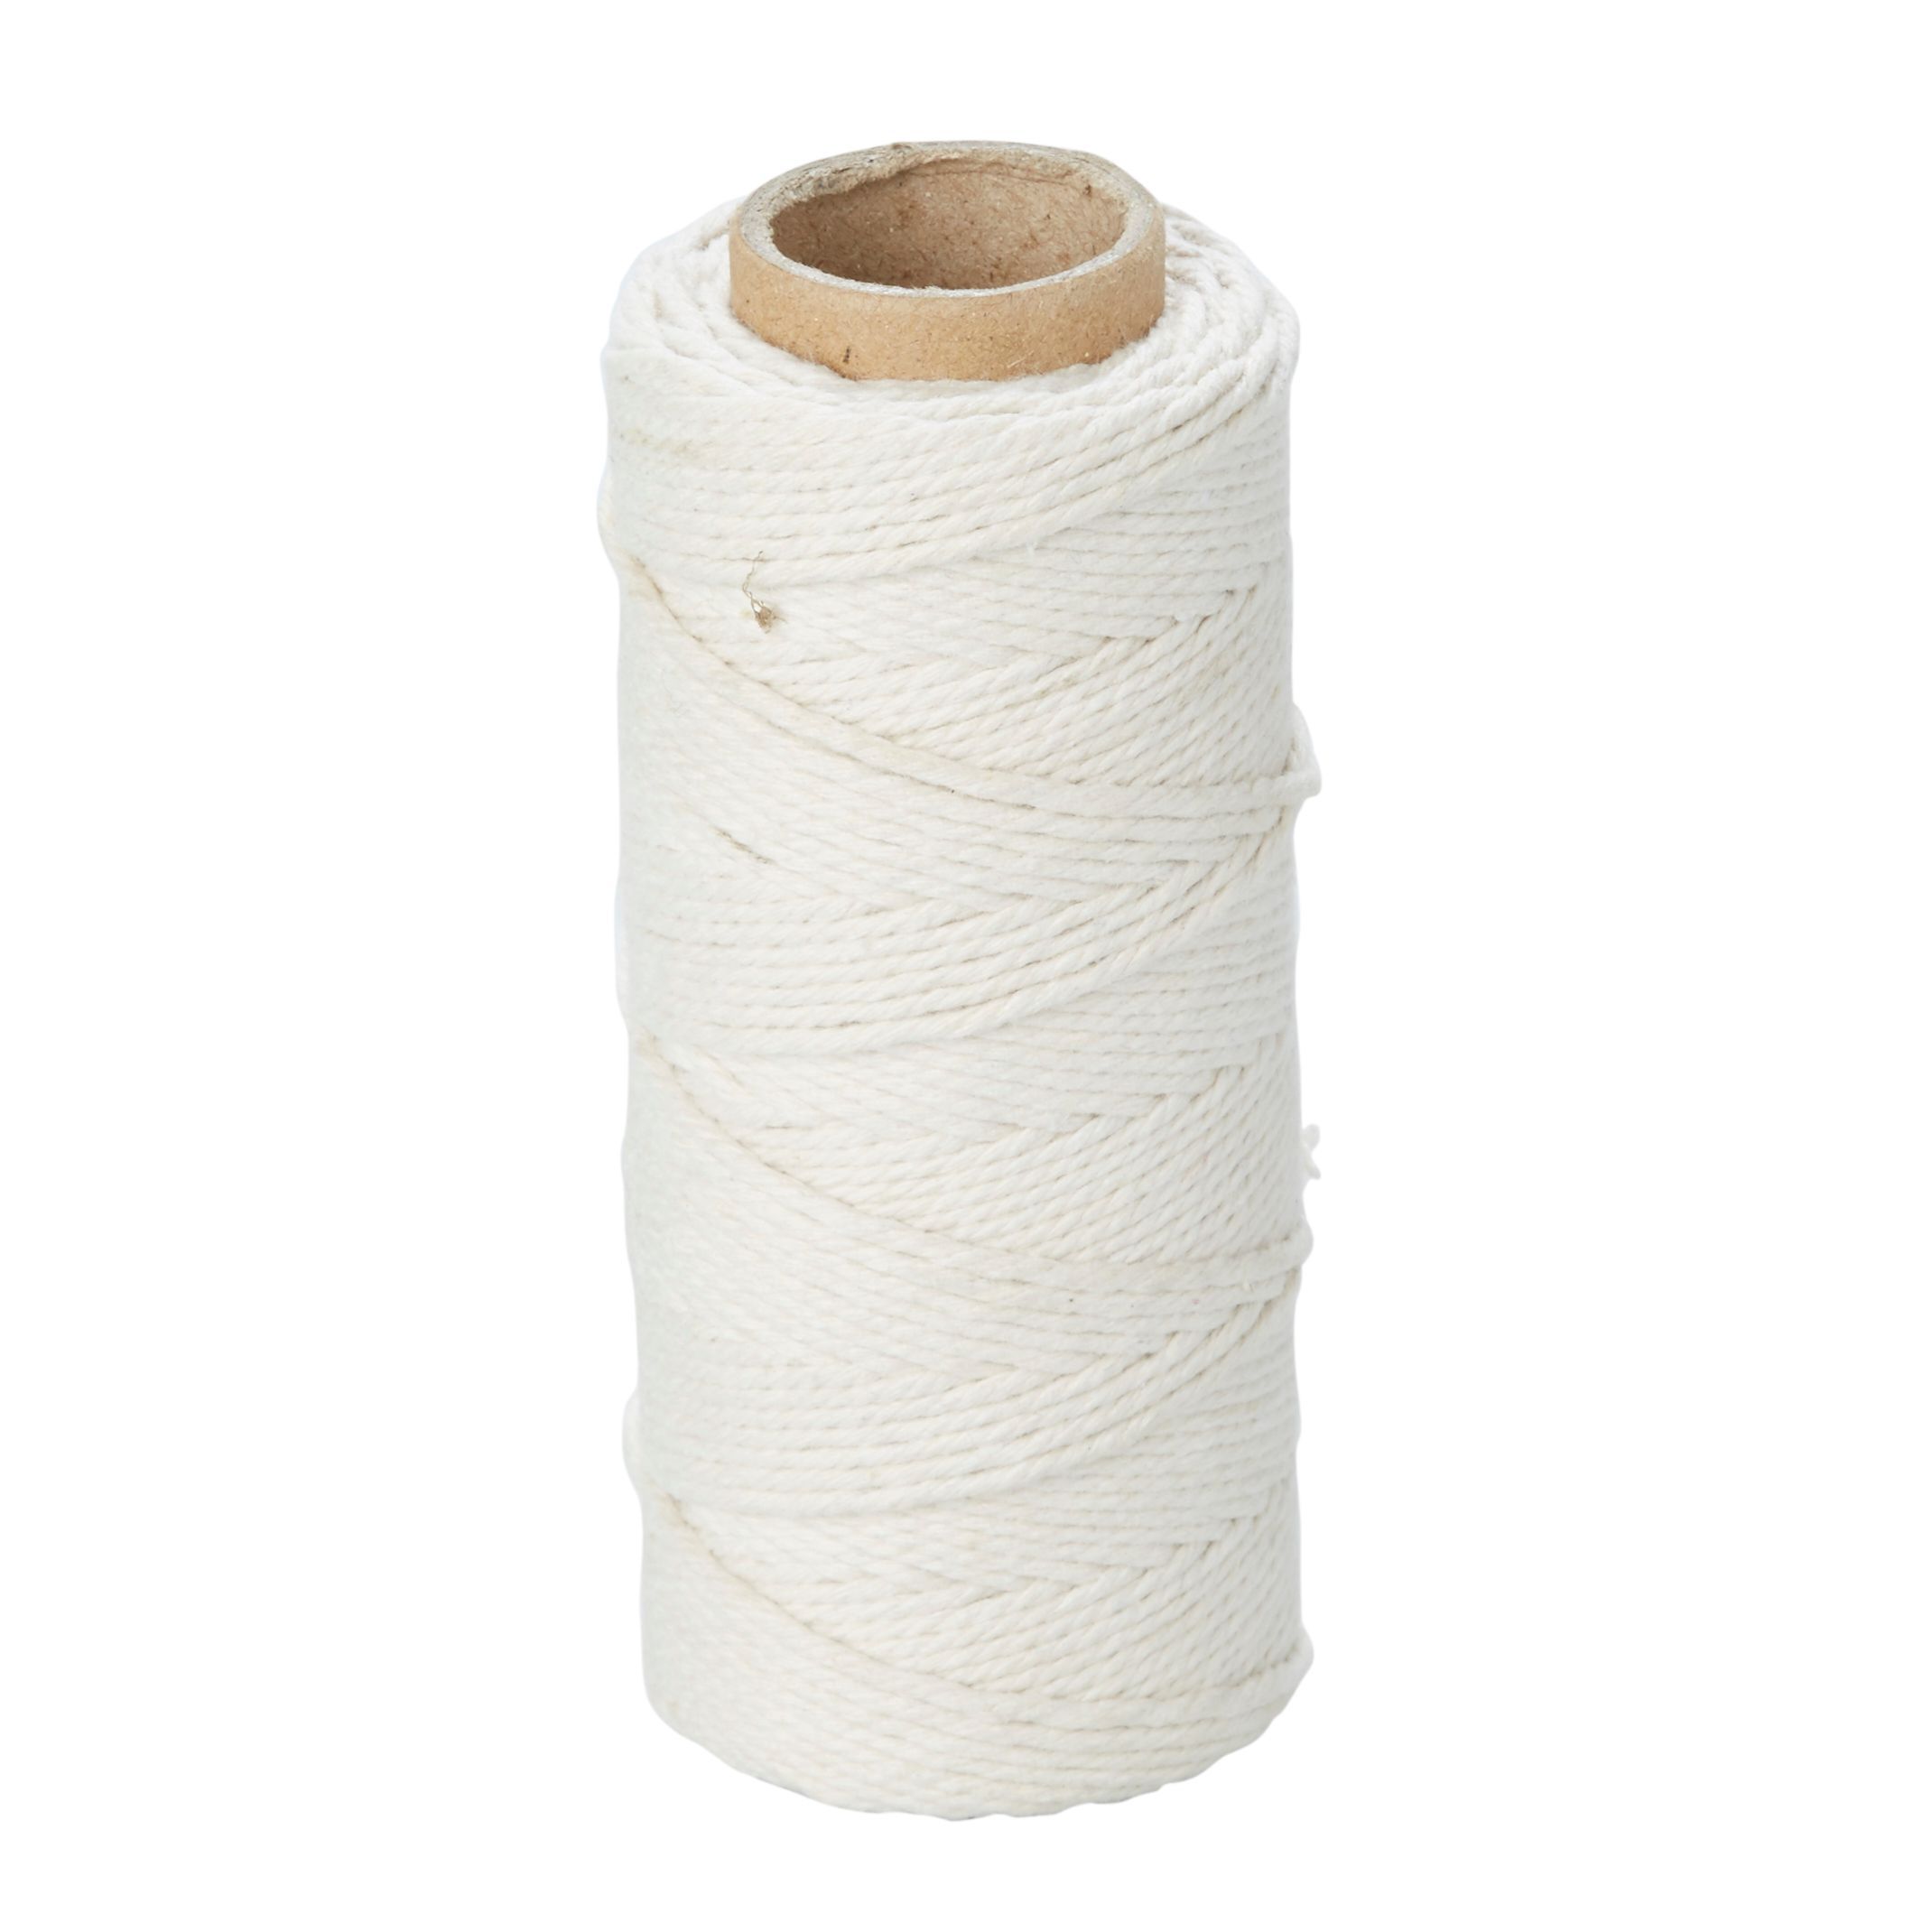  G2PLUS Cotton String,2MM 656Feet Cotton Bakers Twine